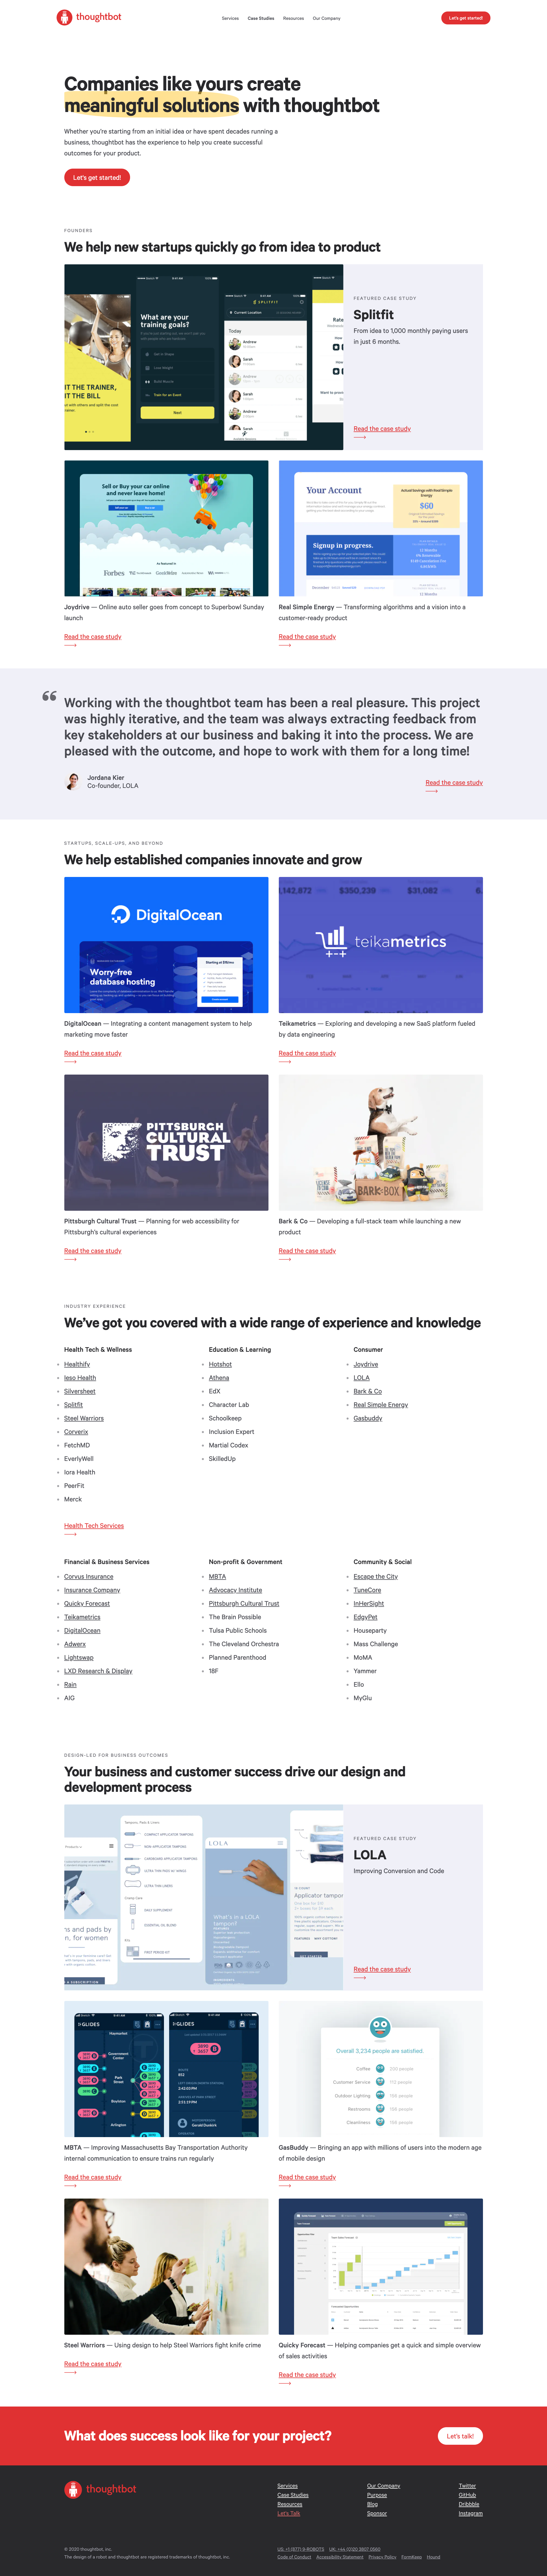 A screenshot of the Case Studies page on thoughtbot.com